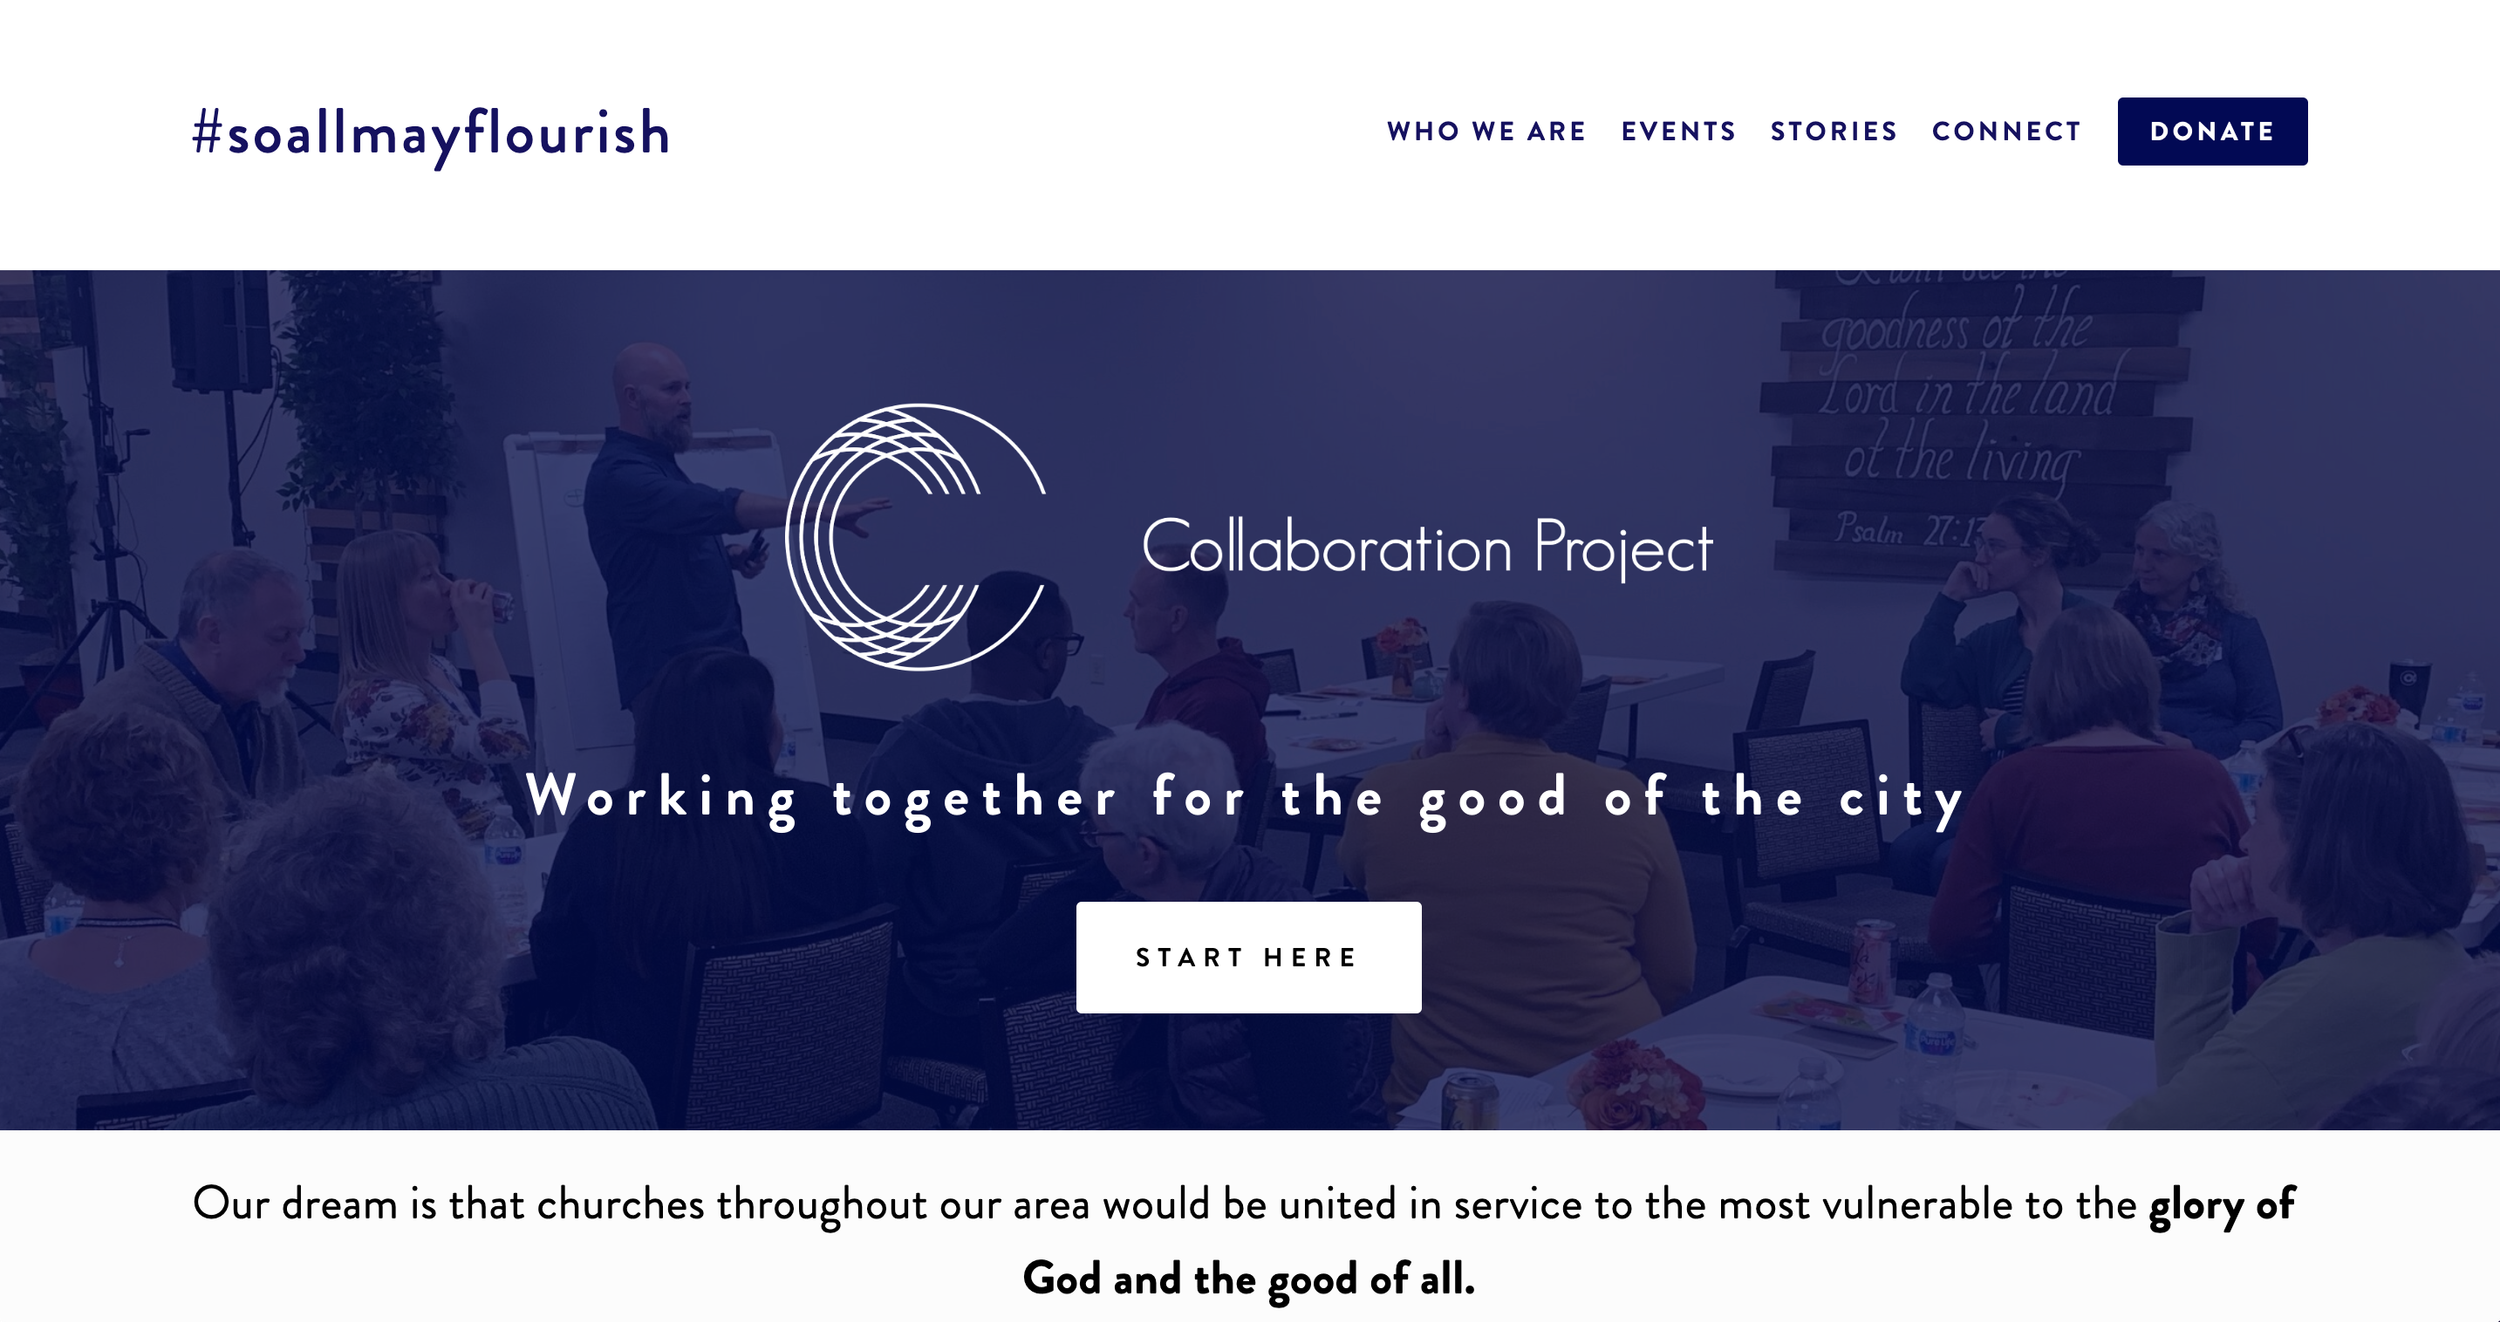 Collaboration Project - Non Profit Based in Madison, WI (Copy)